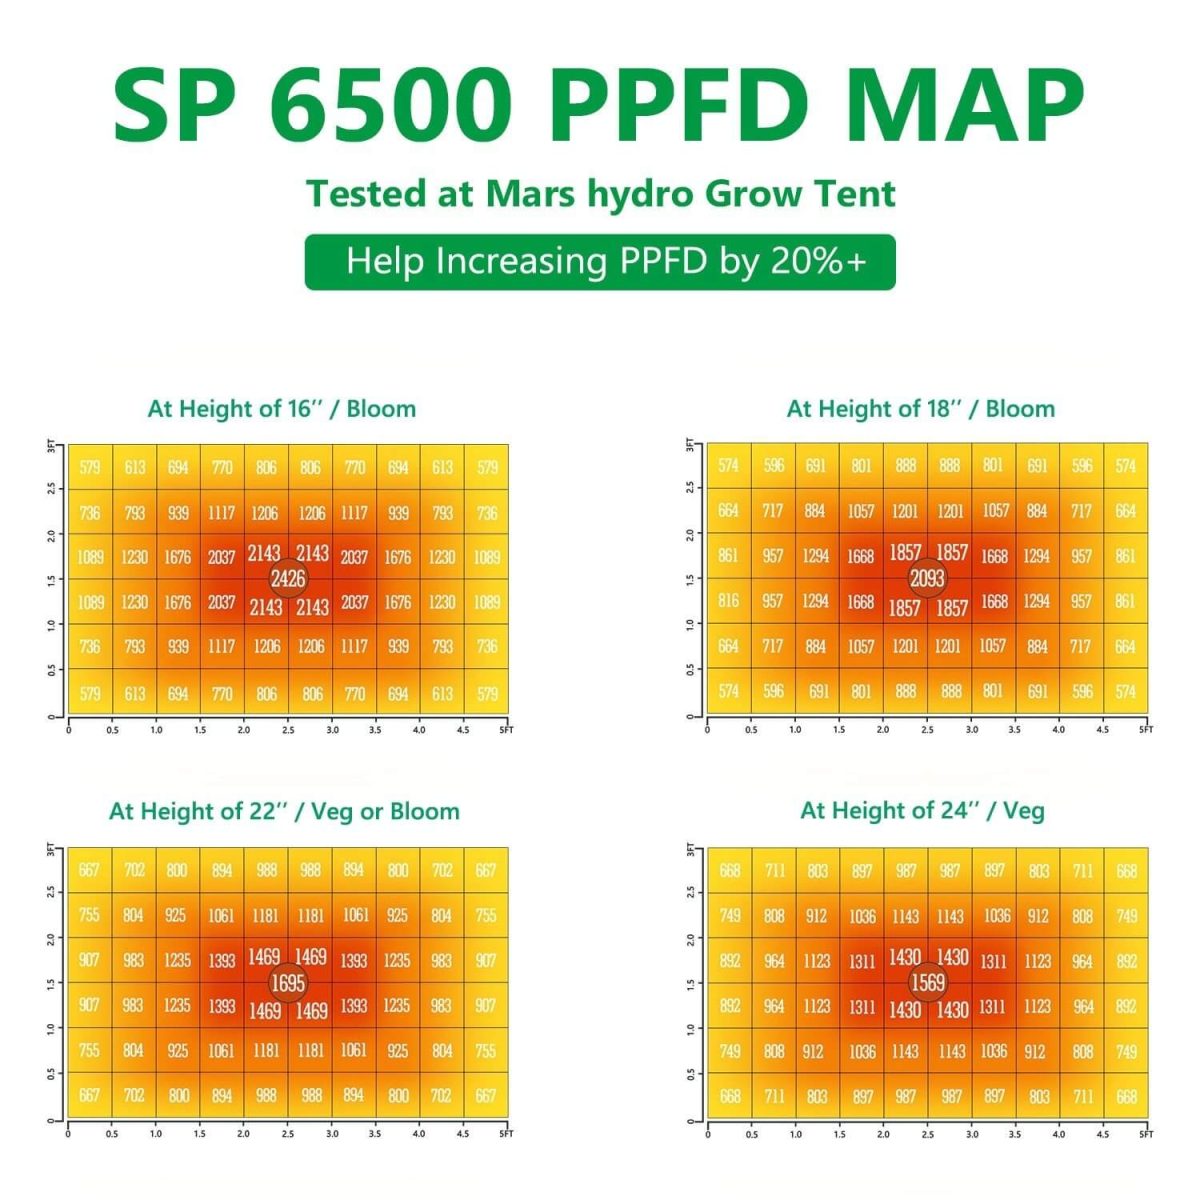 PPFD map of SP3000 , tested in Mars Hydro 2x4 grow tent at different heright 16'', 18'', 22'', 24''